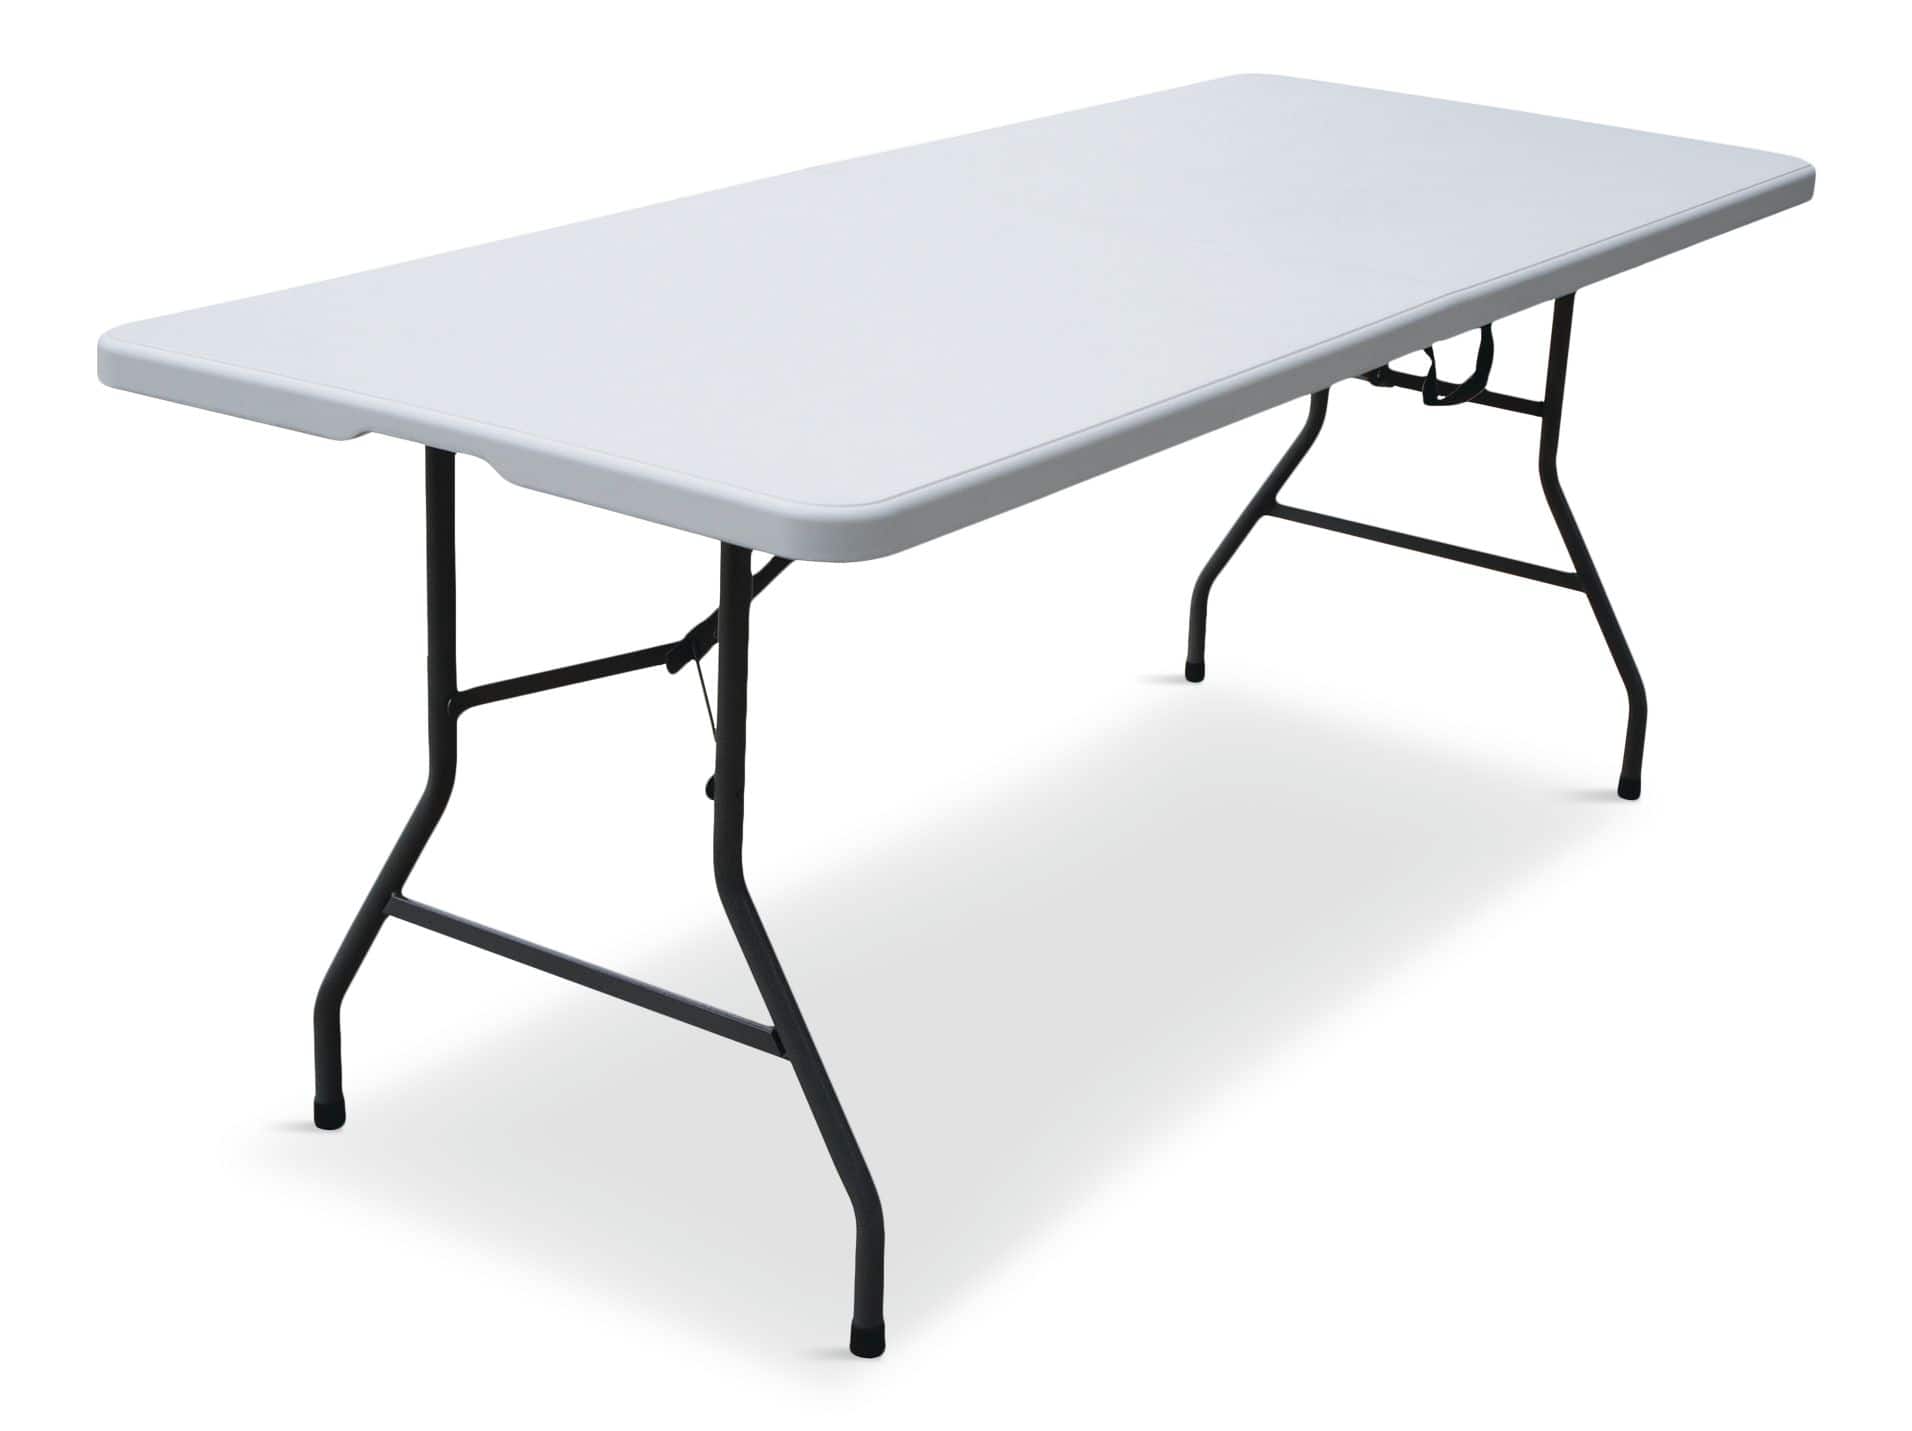 https://media-www.canadiantire.ca/product/living/home-decor/folding-furniture/0688000/for-living-6-folding-table-with-center-fold-white-bdea07a6-4805-4f82-ac83-ee1ce083b1e1-jpgrendition.jpg